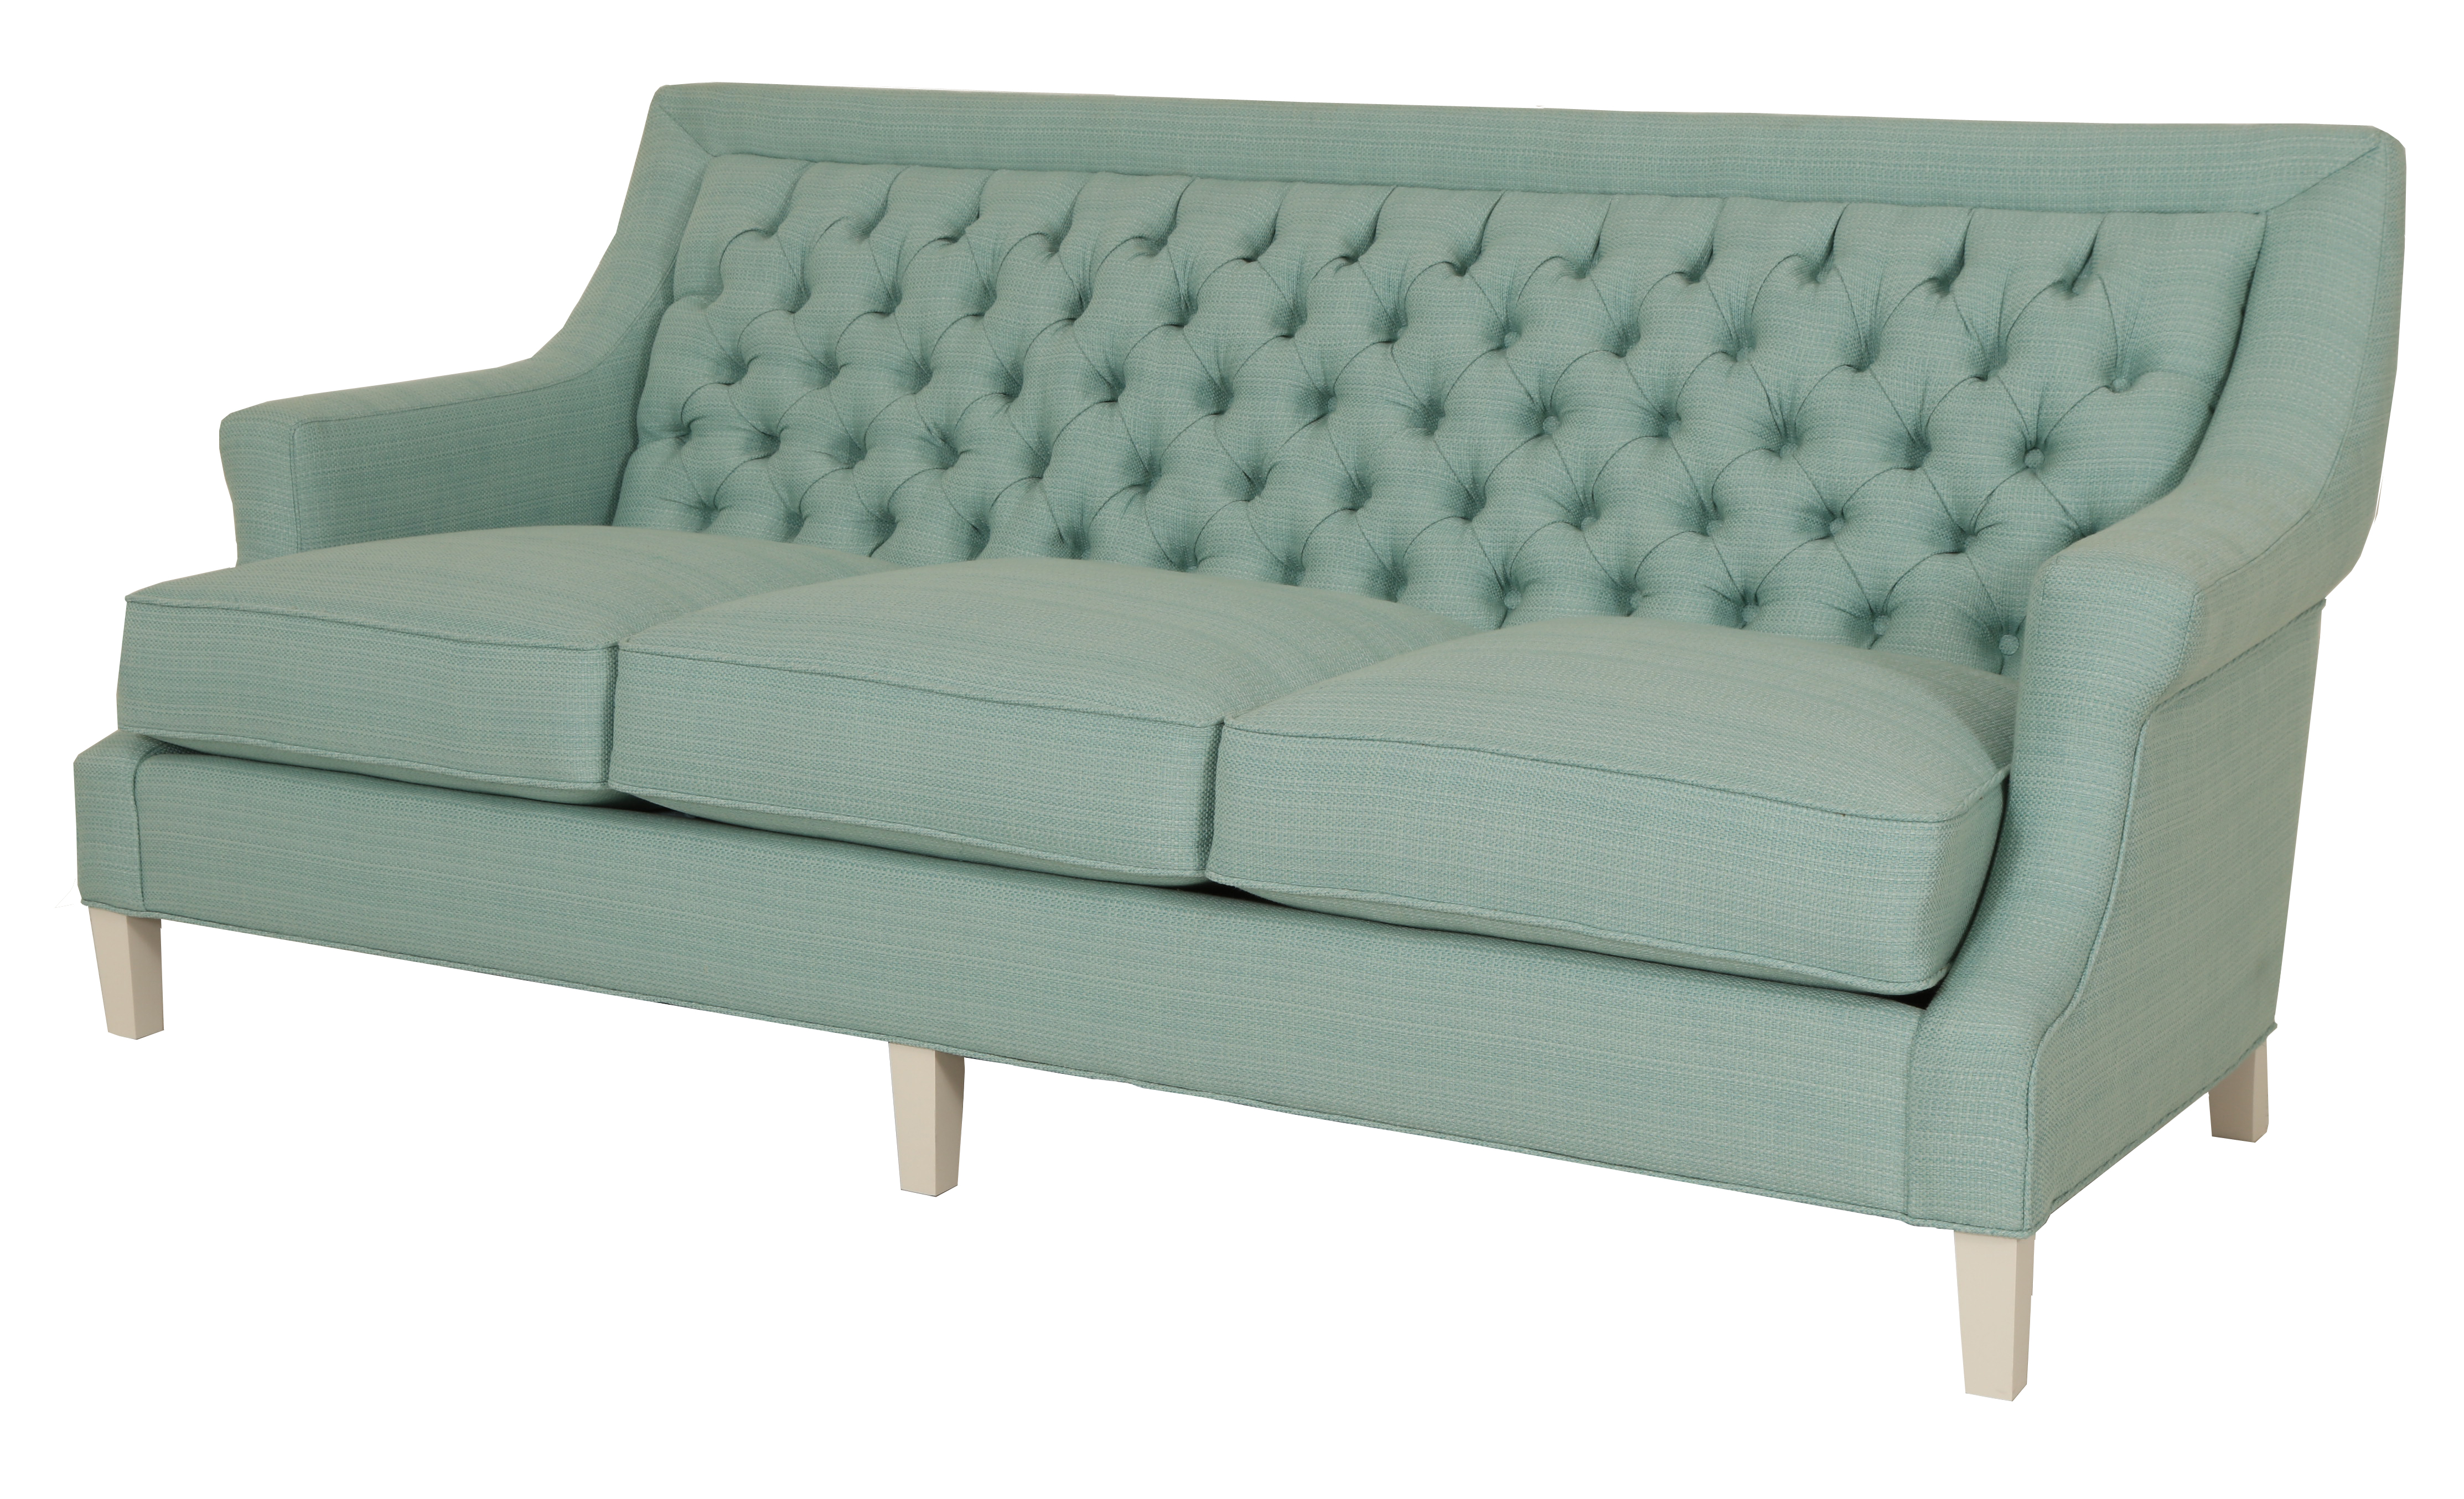 Parisian sofa in light green from Company C for Norwalk Furniture  